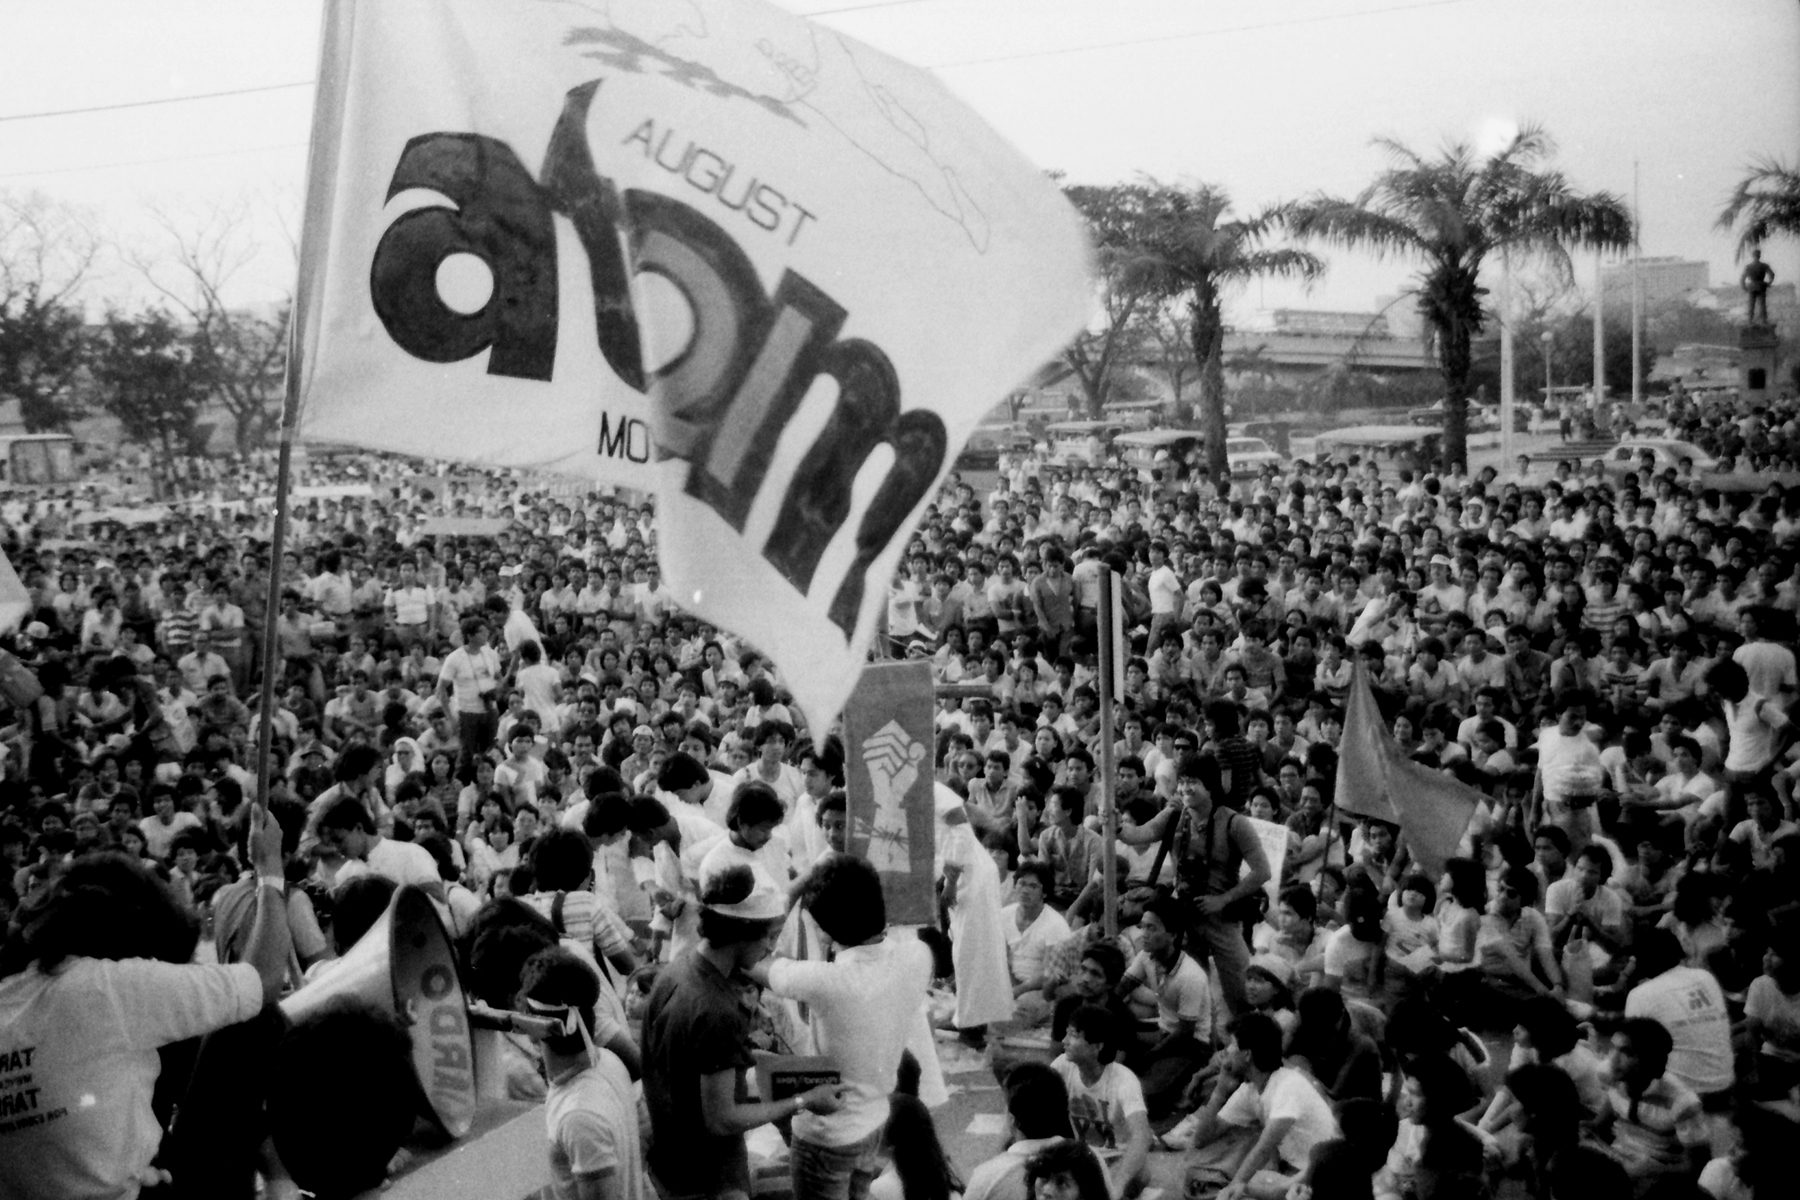 IN PHOTOS: EDSA Revolution: Not just in 4 days